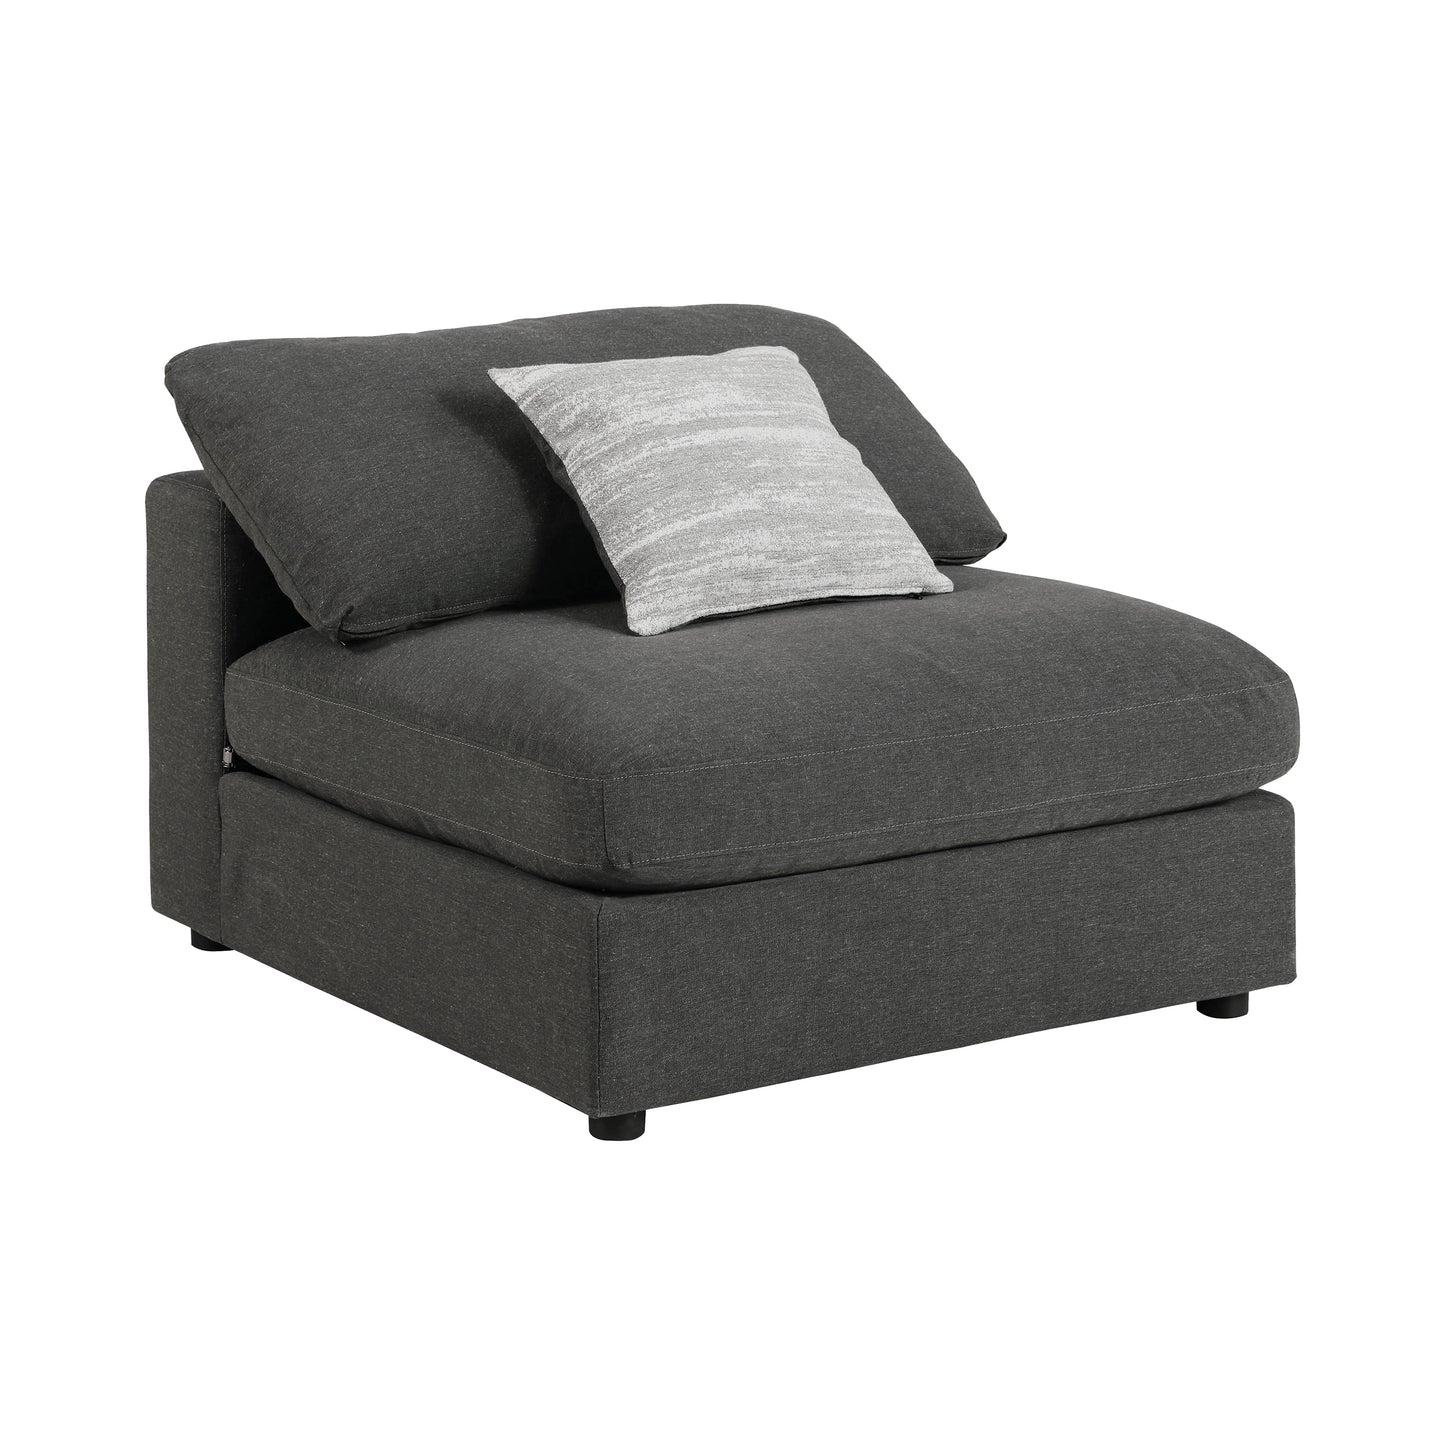 6-Piece Upholstered Modular Sectional Charcoal - 551324